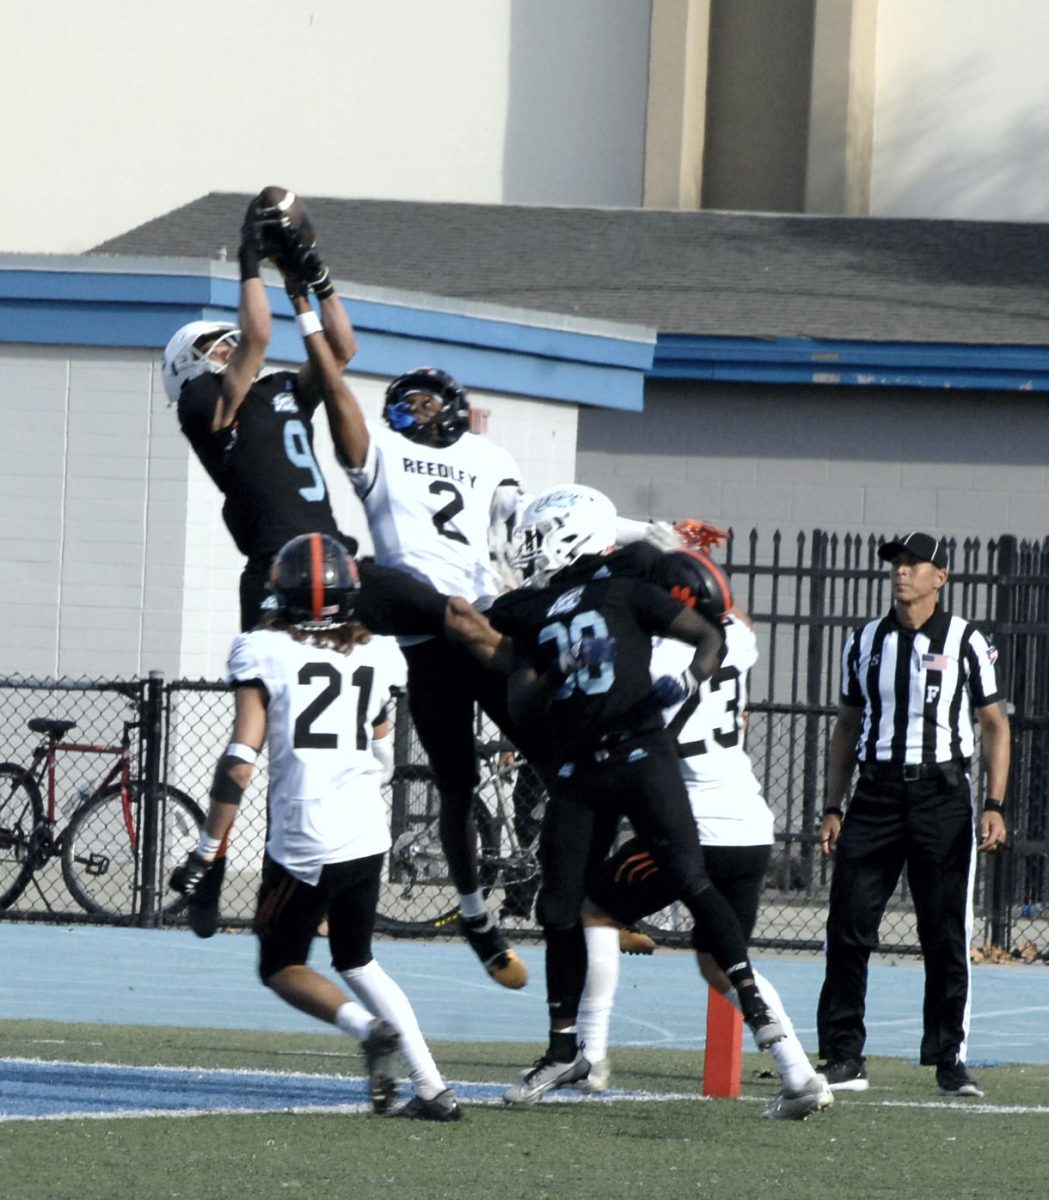 Contra Costa Comet player no#. 9, DB Tasean Young, reach is greater than the Reedley players.

San Pablo Ca 14 October 2023, Contra Costa College vs Reedley
